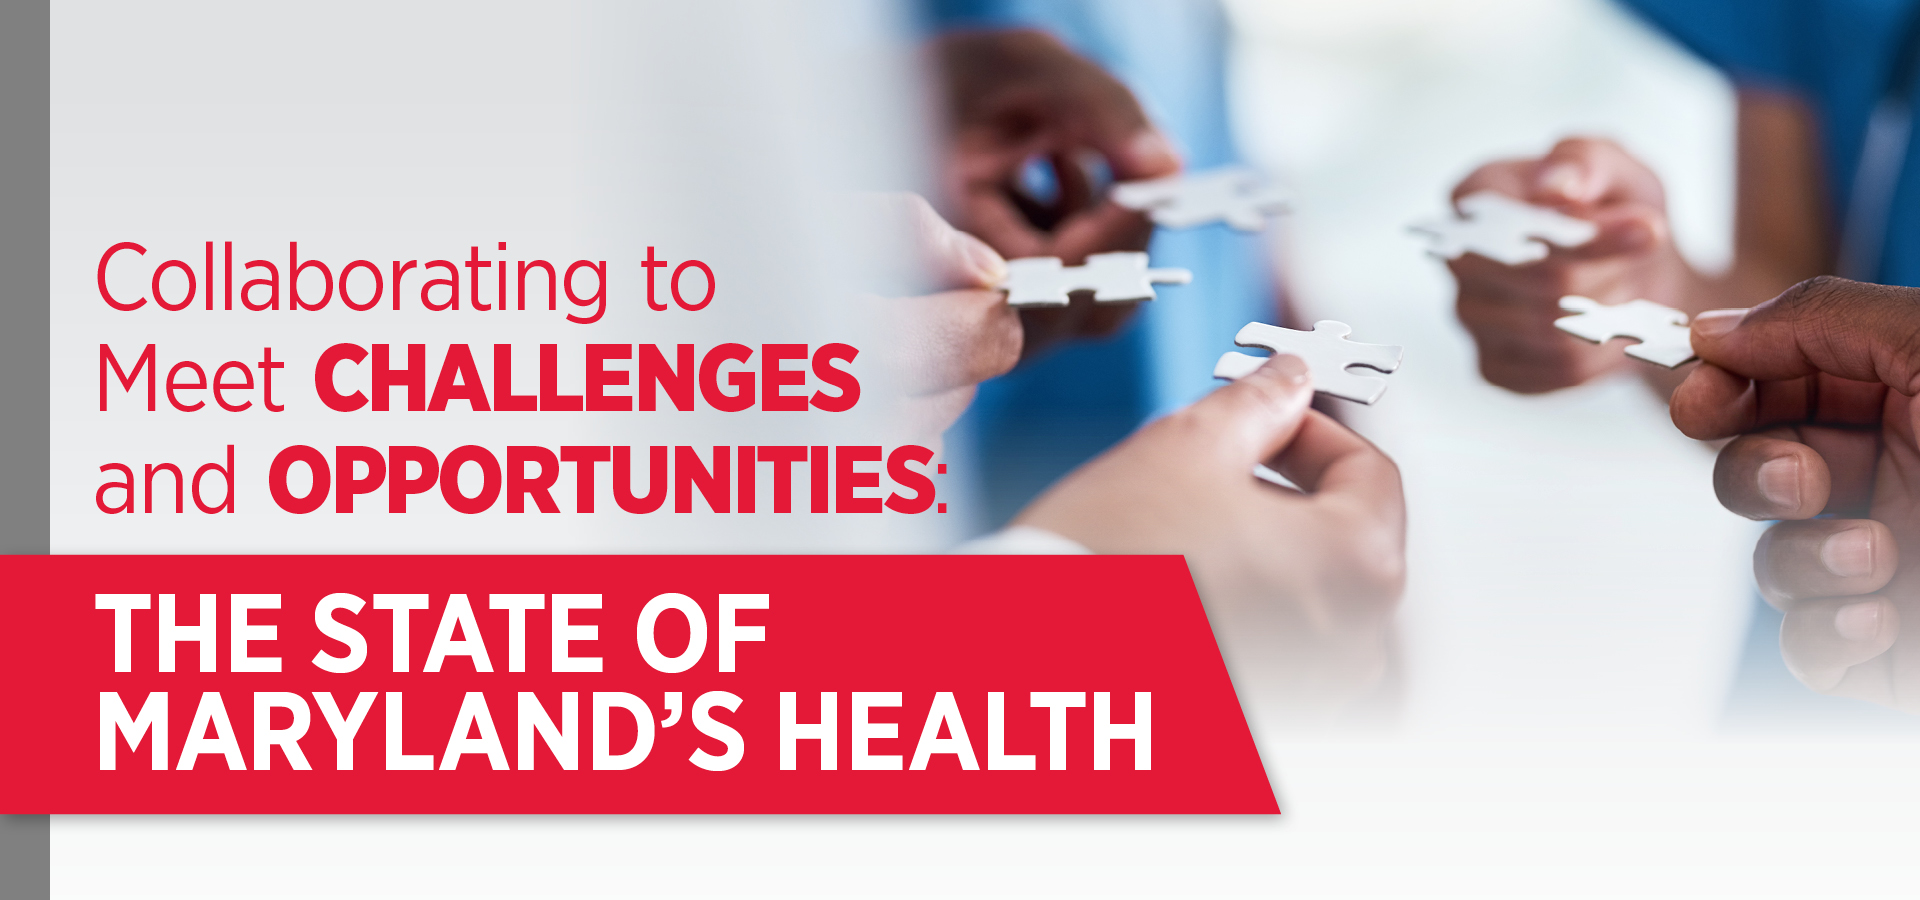 Collaborating to Meet Challenges and Opportunities: The State of Maryland's Health